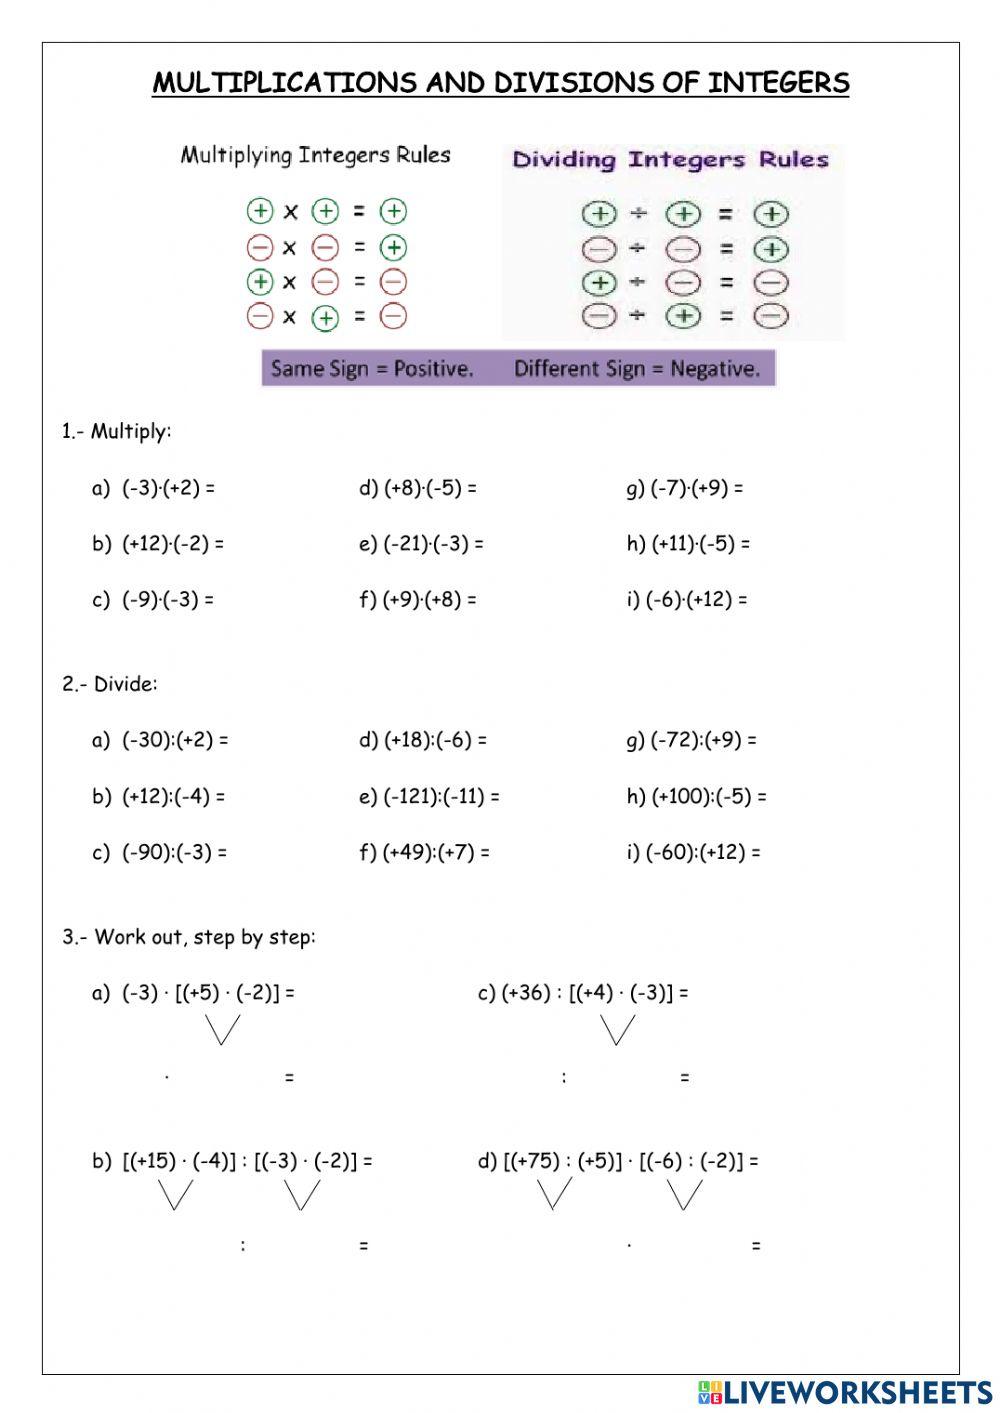 Multiplications and Divisions with Integers